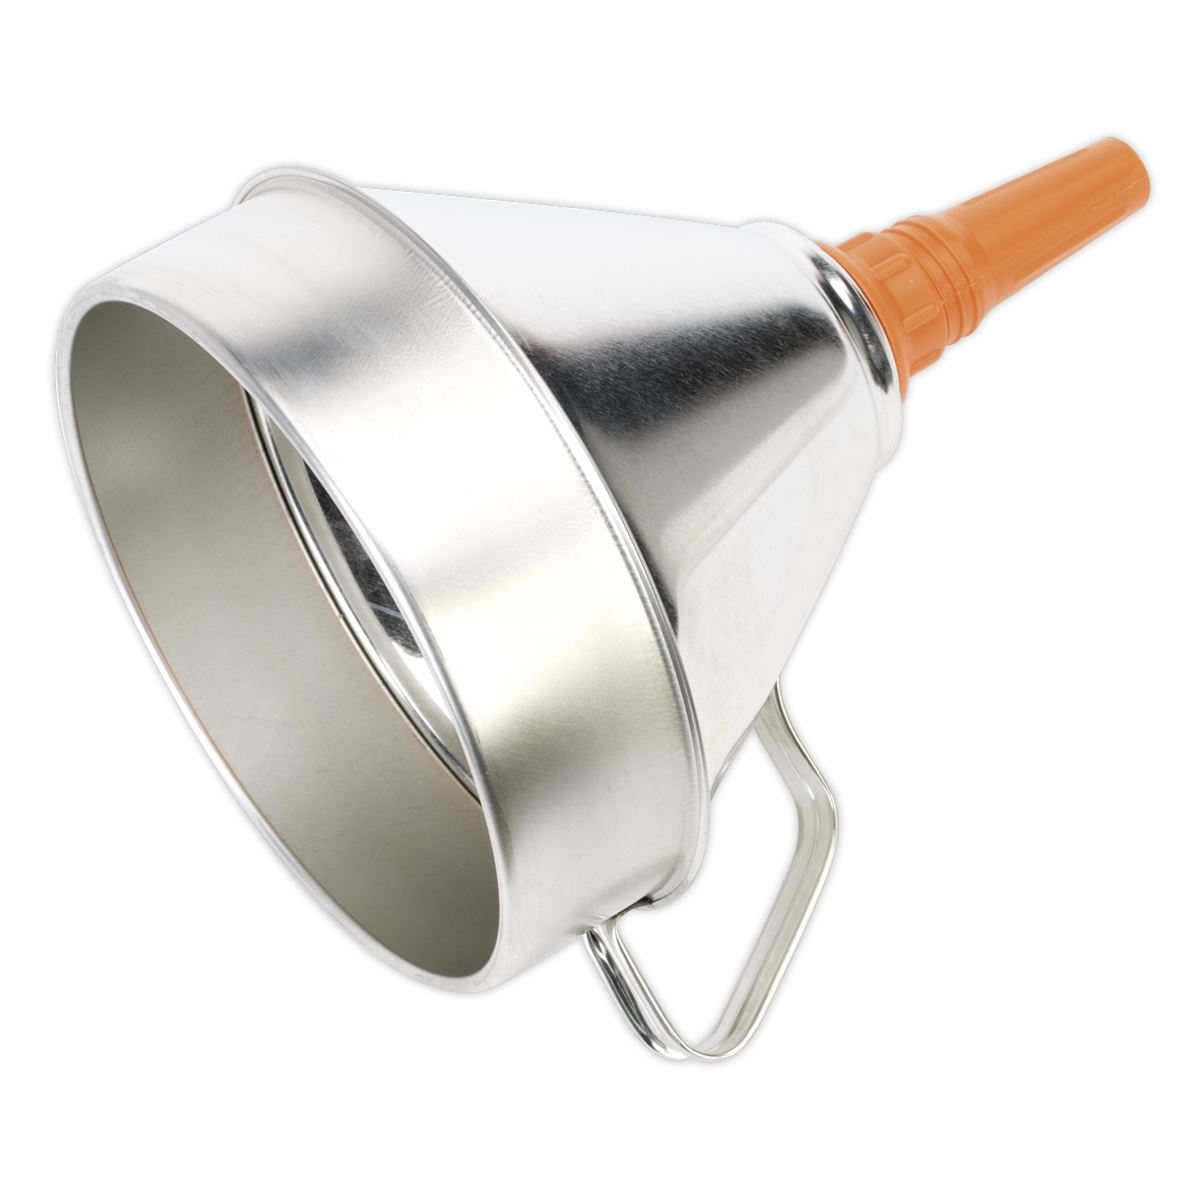 Sealey Funnel Metal with Filter Ø200mm